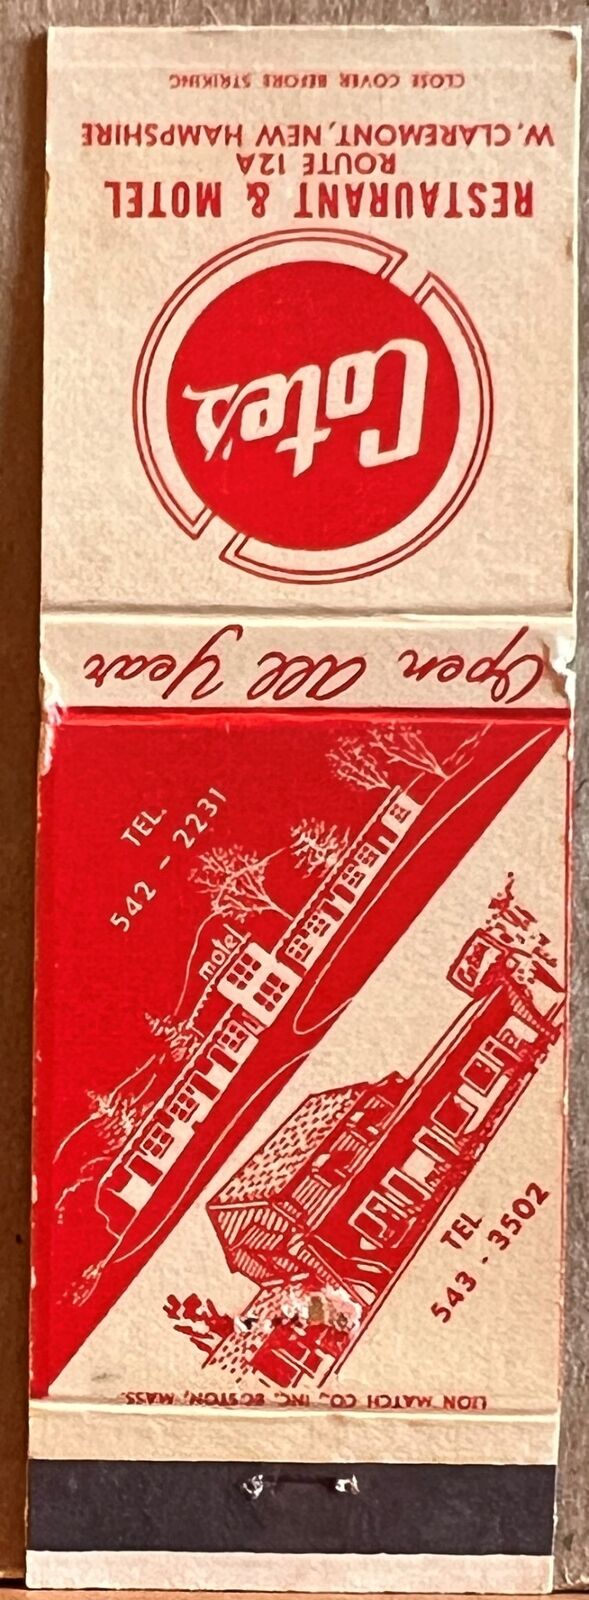 Cote's Restaurant & Motel West Claremont NH New Hampshire Matchbook Cover